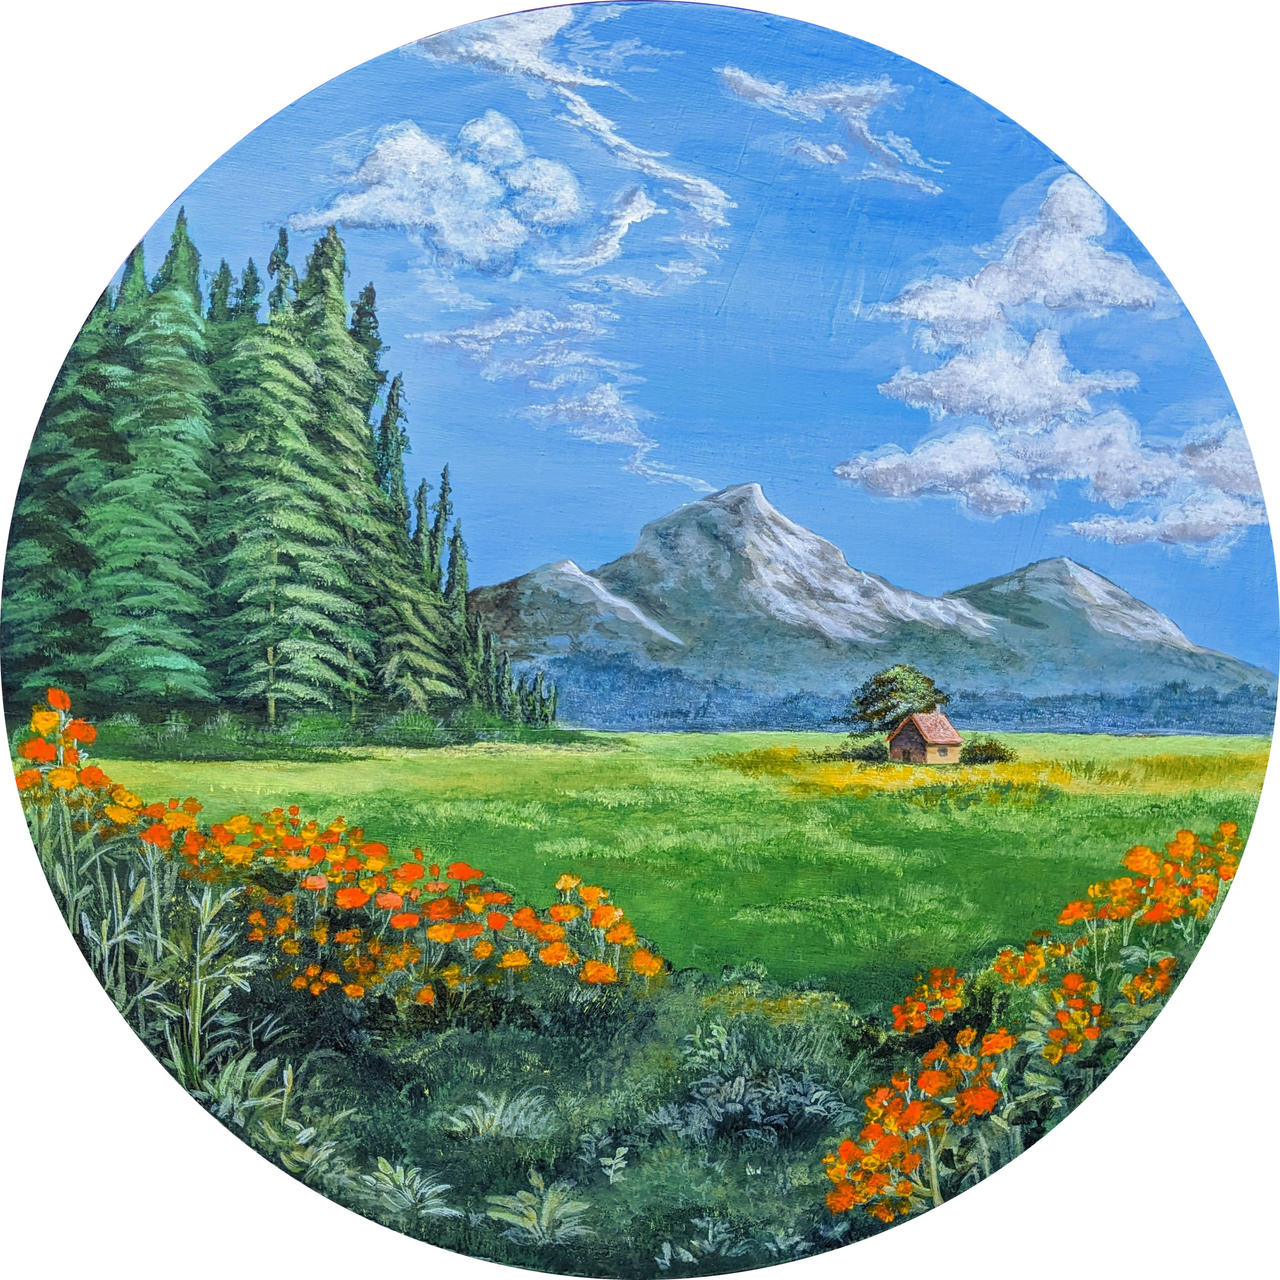 Acrylic Painting on a circular canvas (40 by 40cm) by AnmolArt on DeviantArt